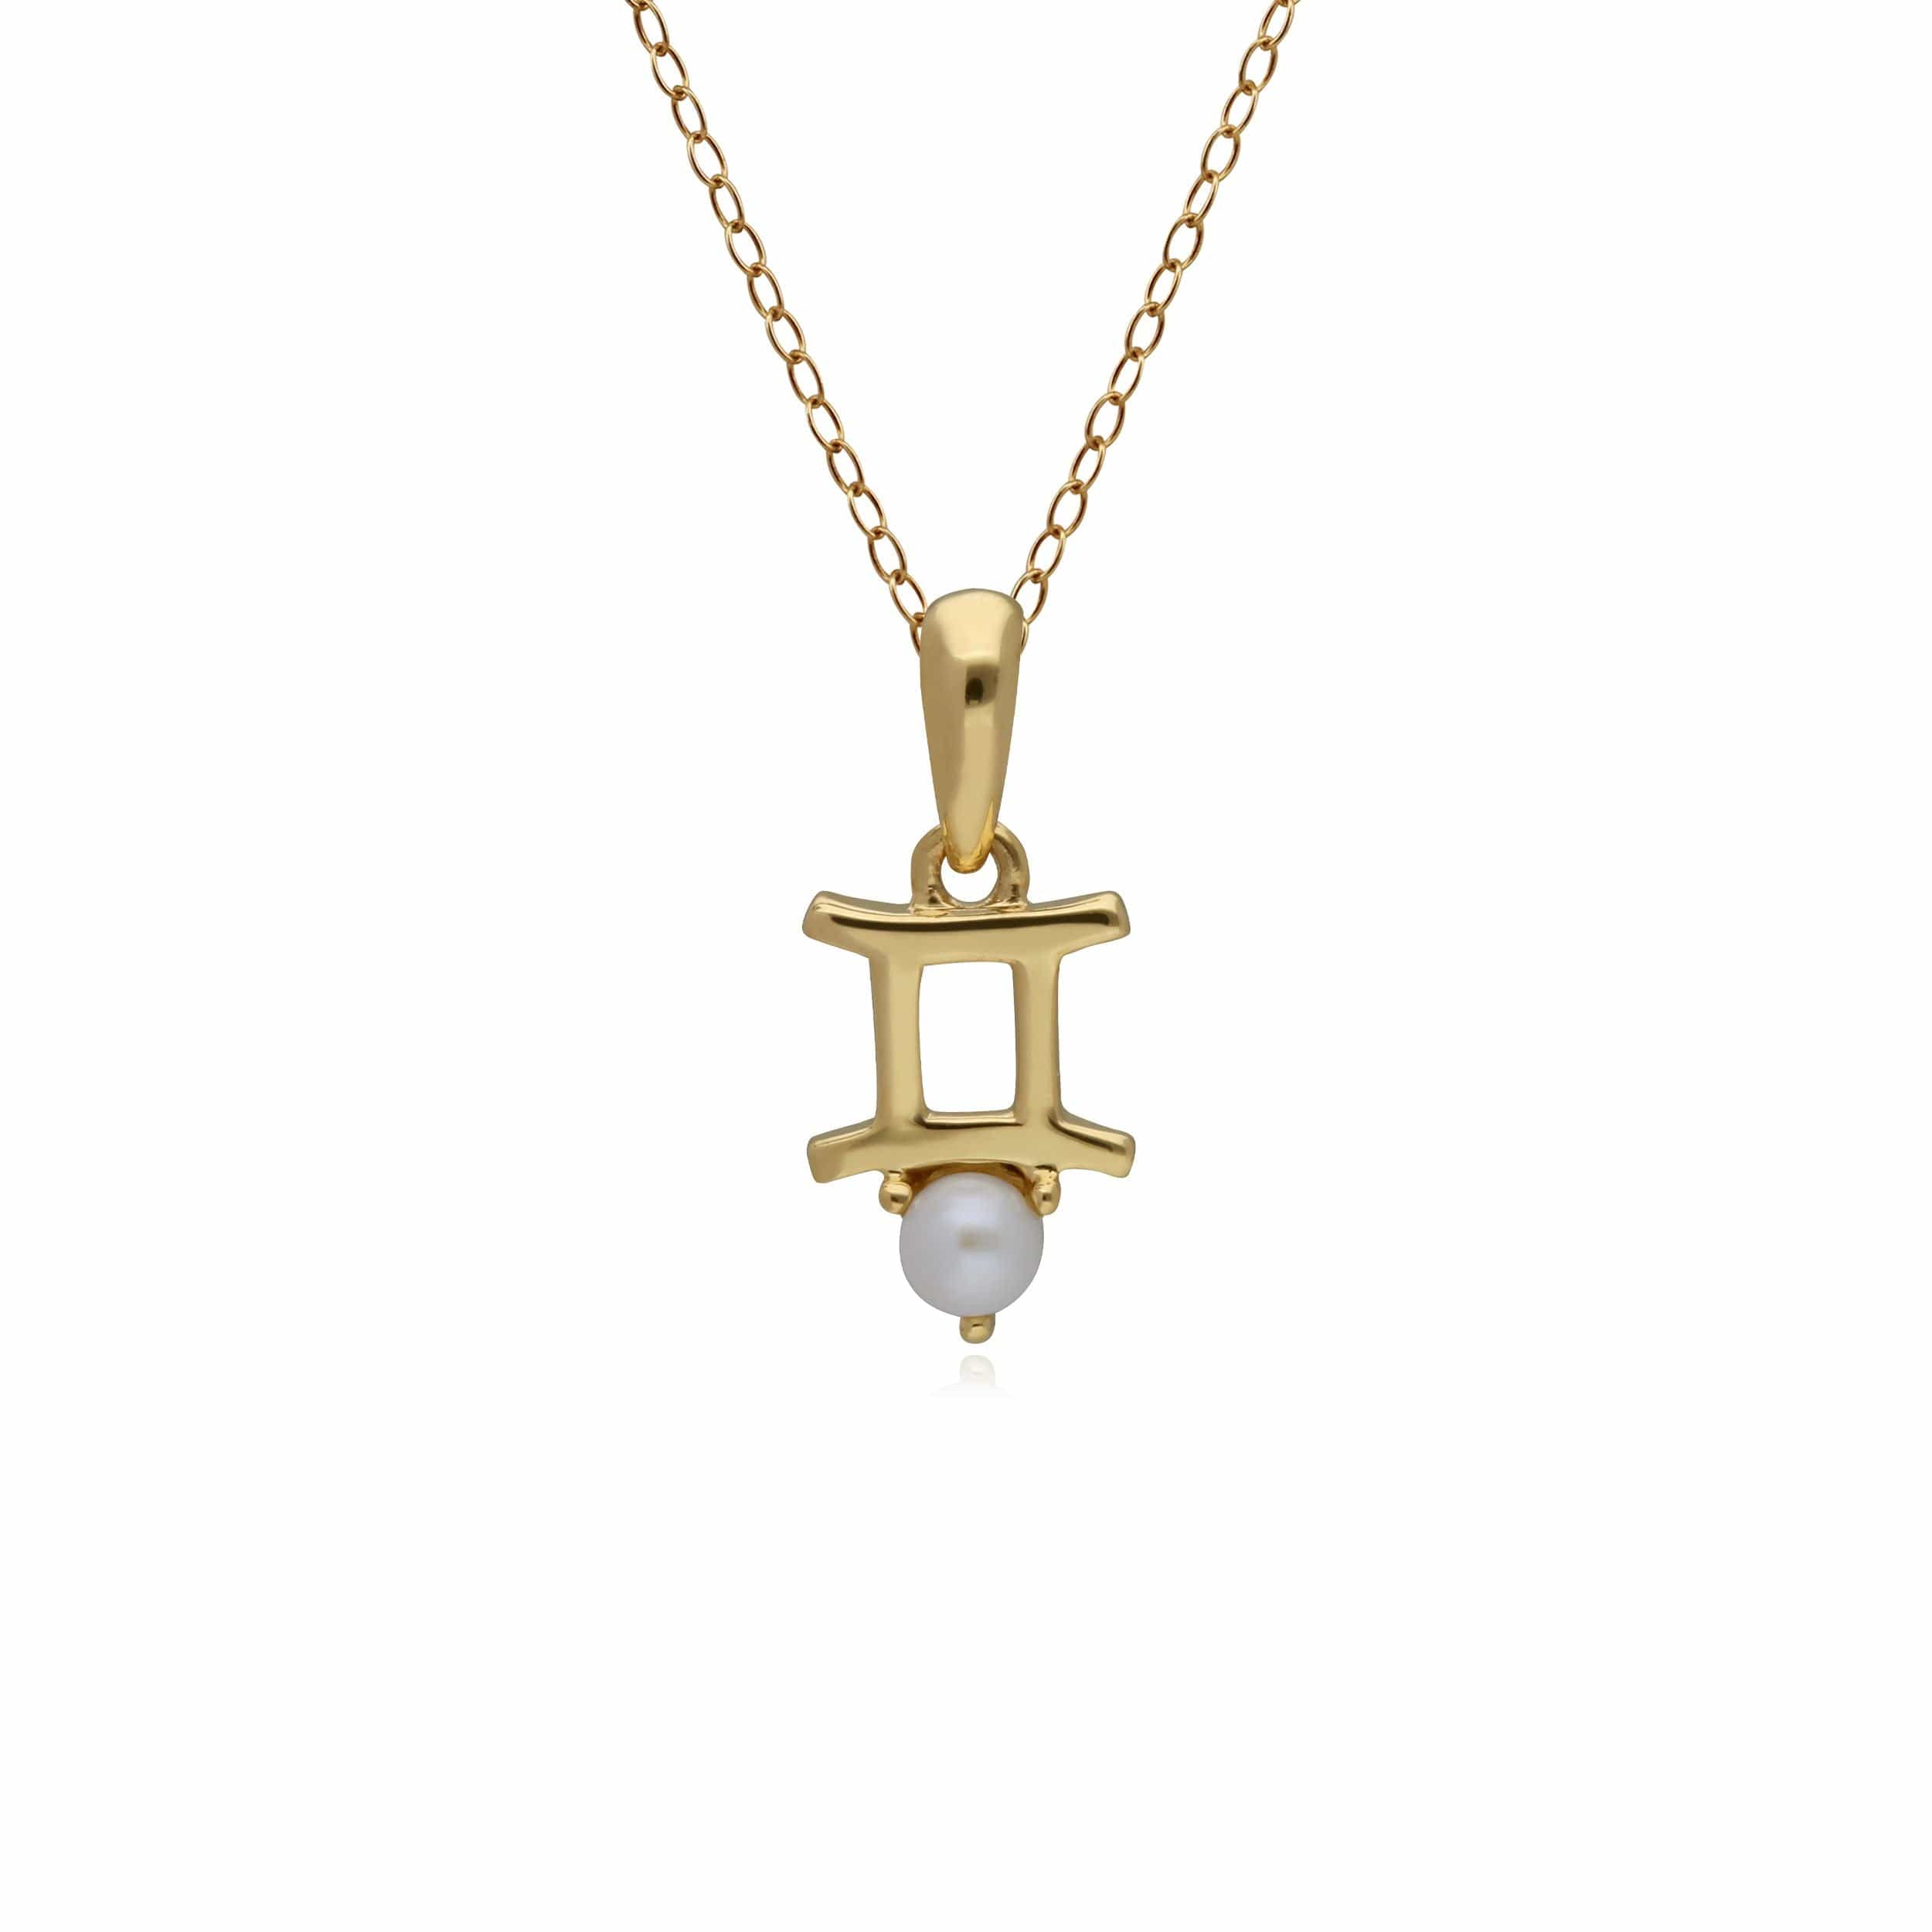 135P1997019 Pearl Gemini Zodiac Charm Necklace in 9ct Yellow Gold 1